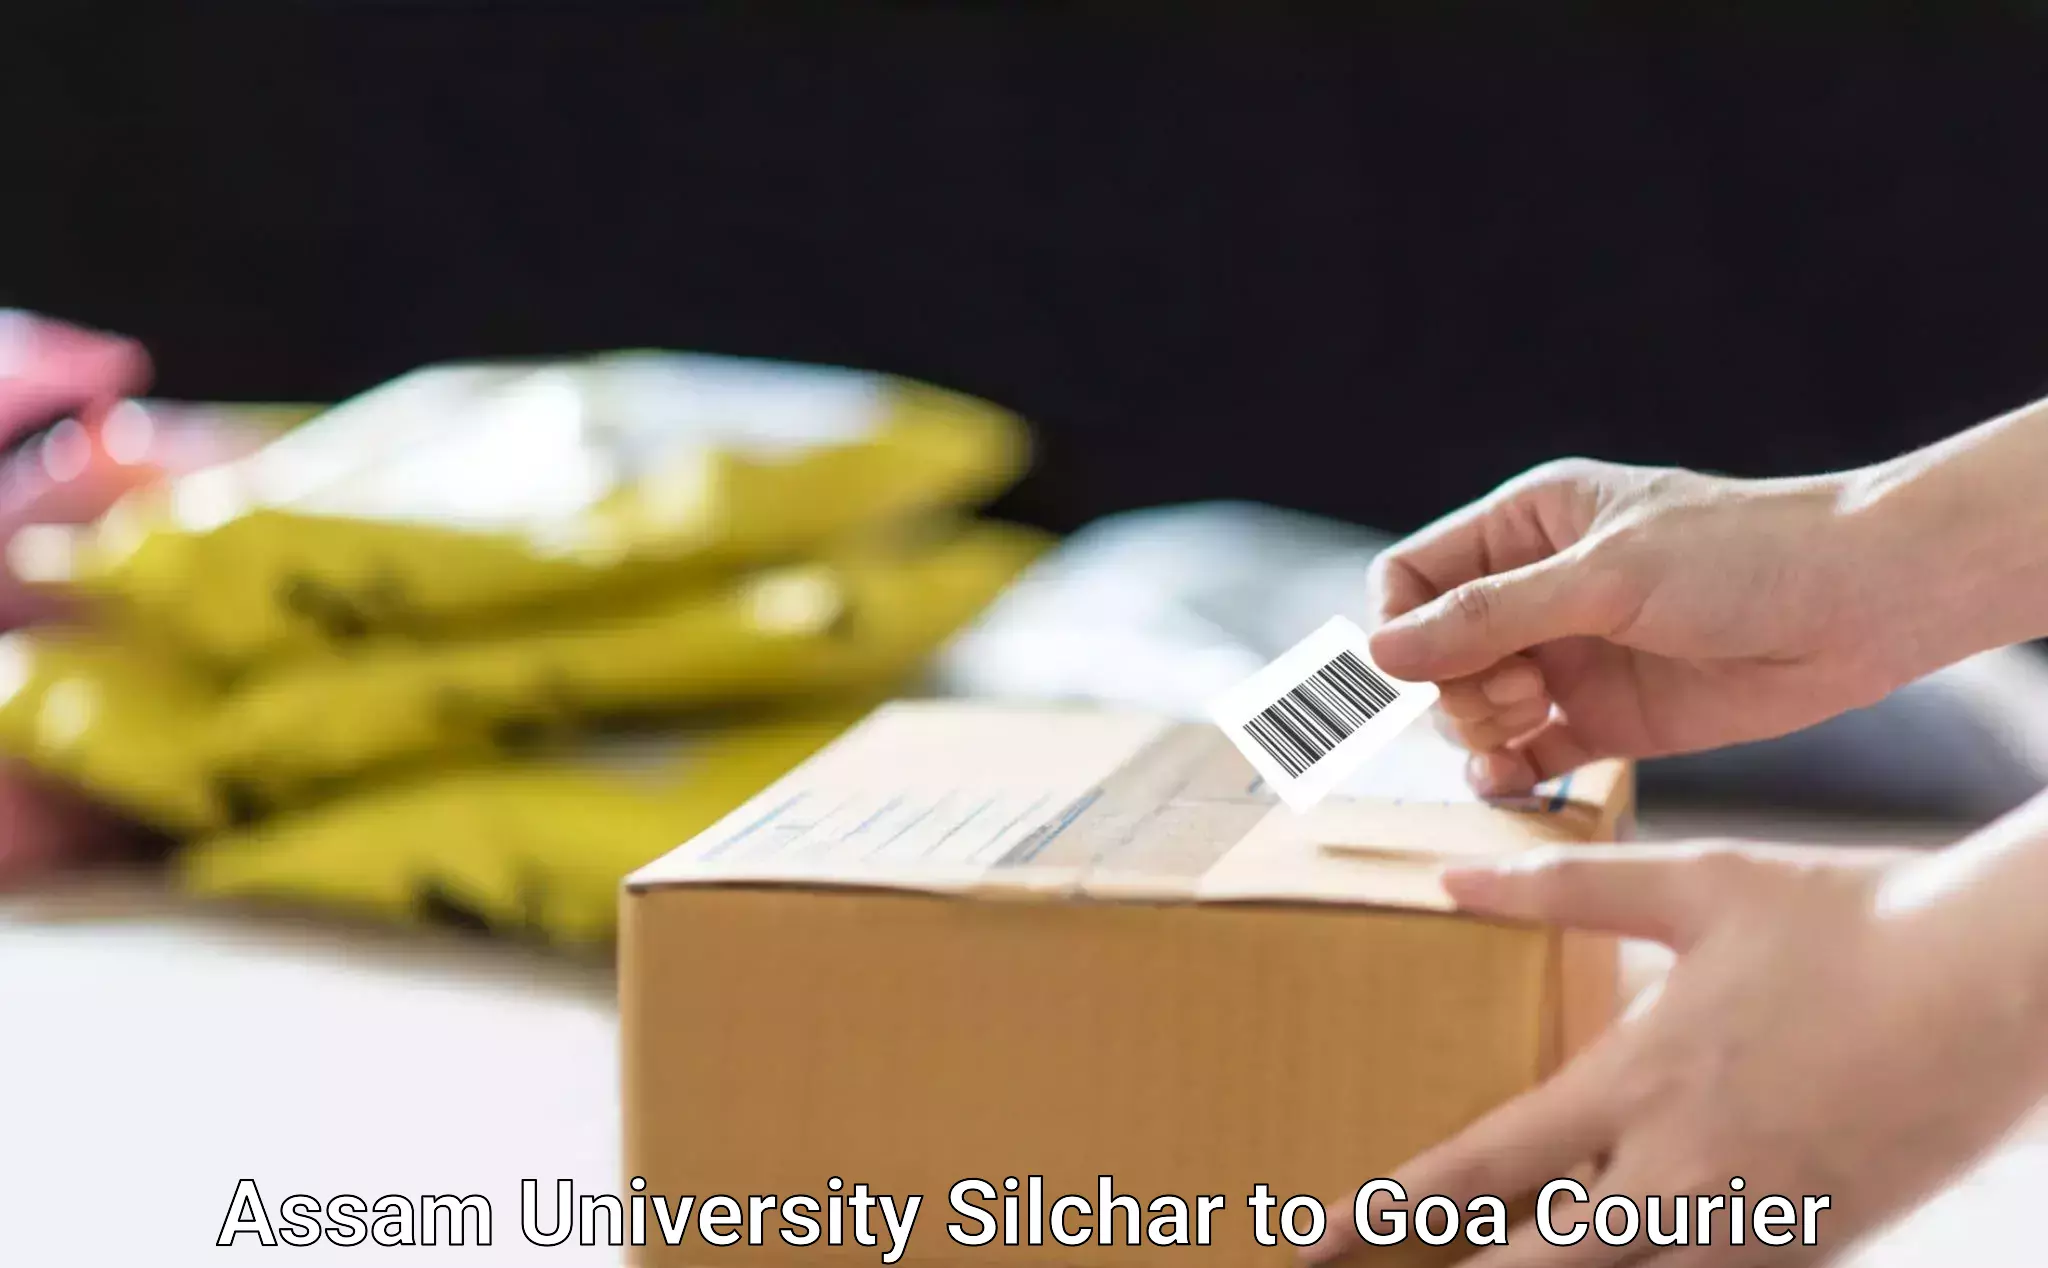 State-of-the-art courier technology Assam University Silchar to Ponda